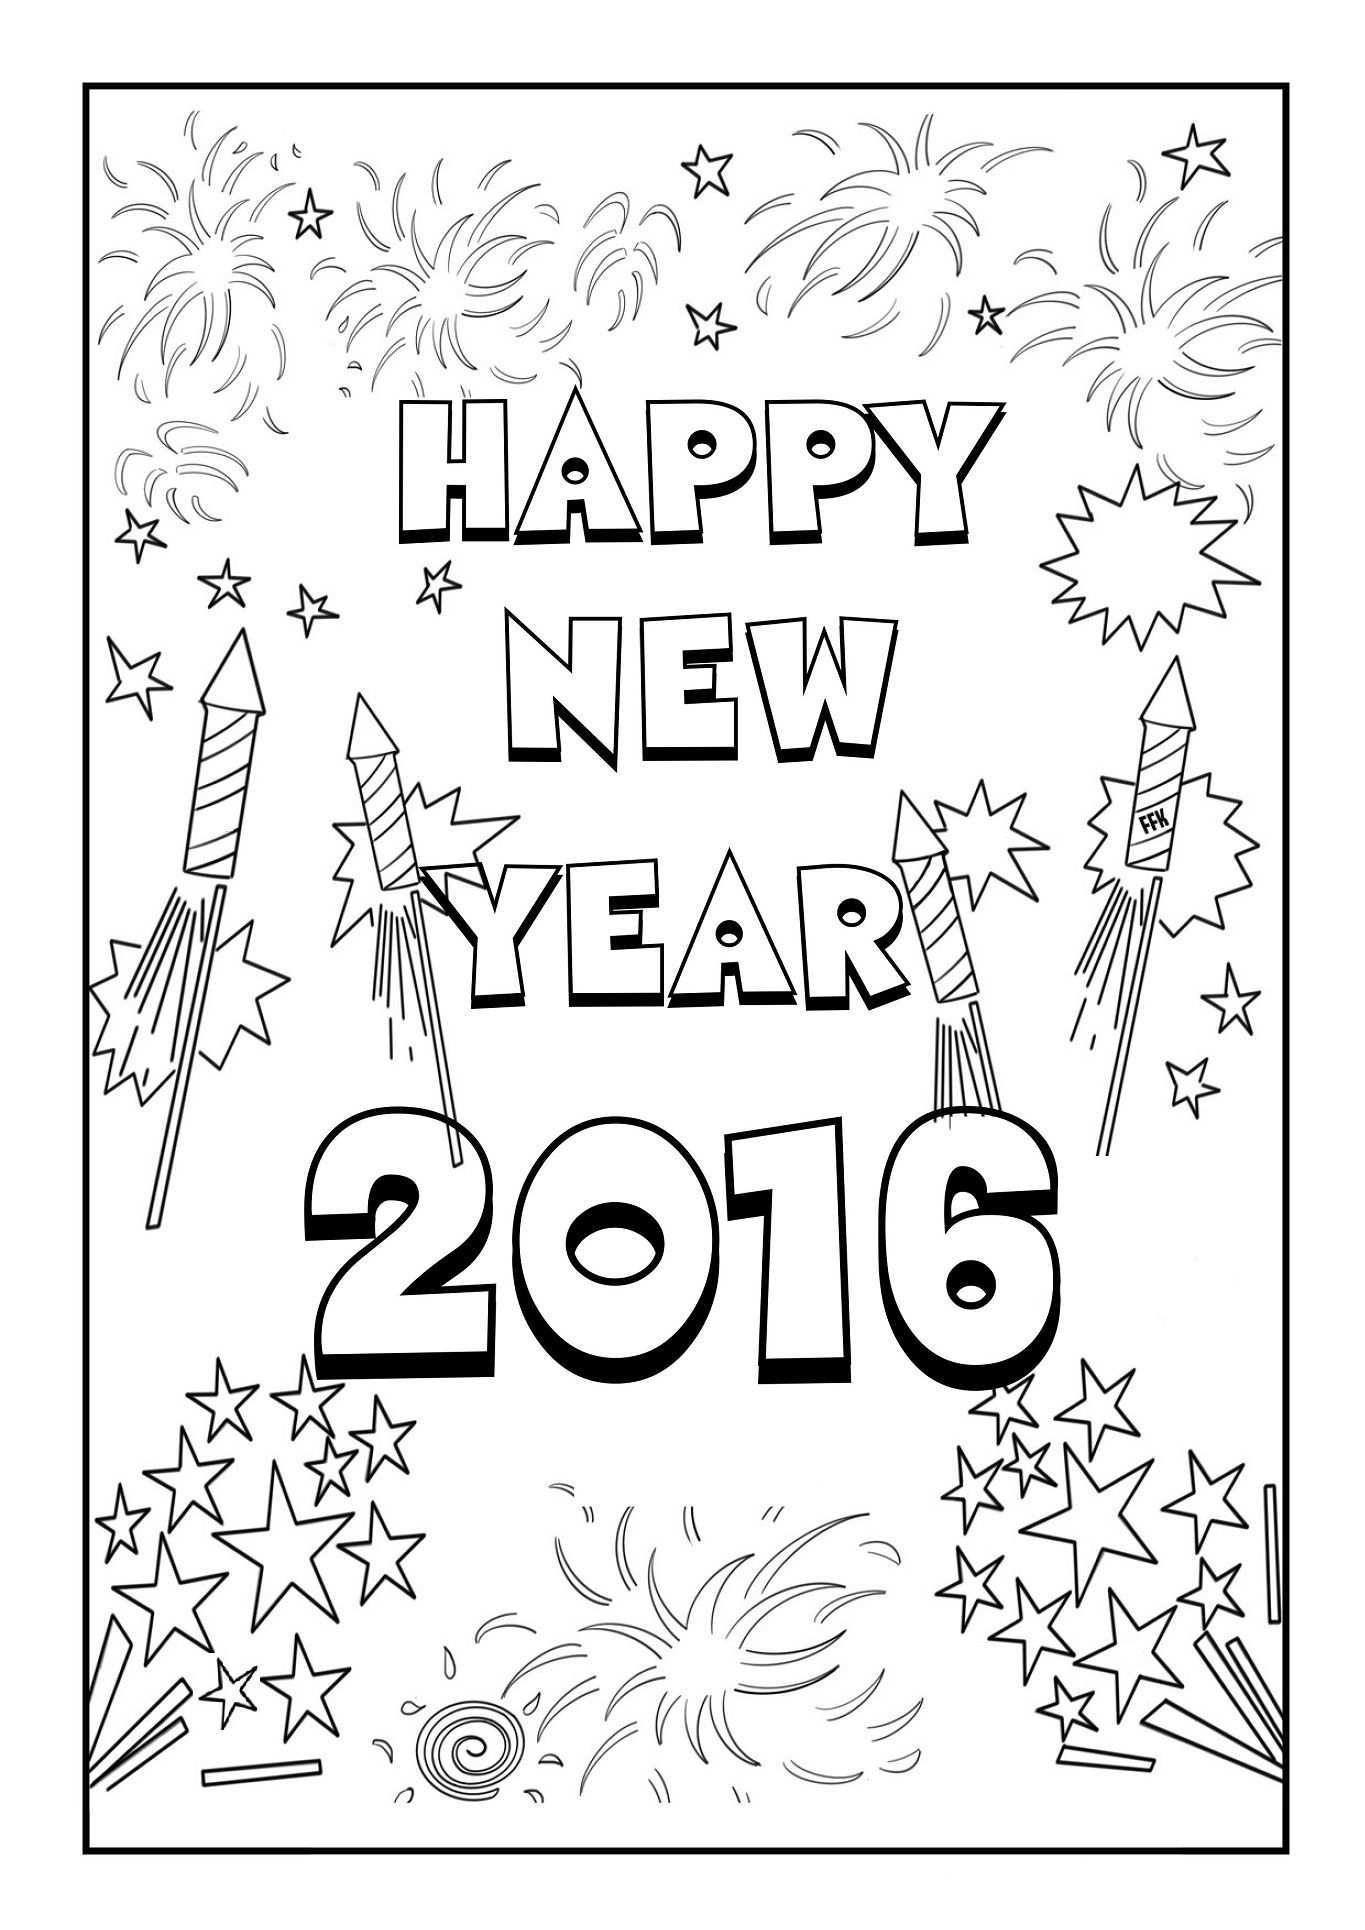 Happy New Year New Year Coloring Pages New Year S Eve Colors Coloring Pages